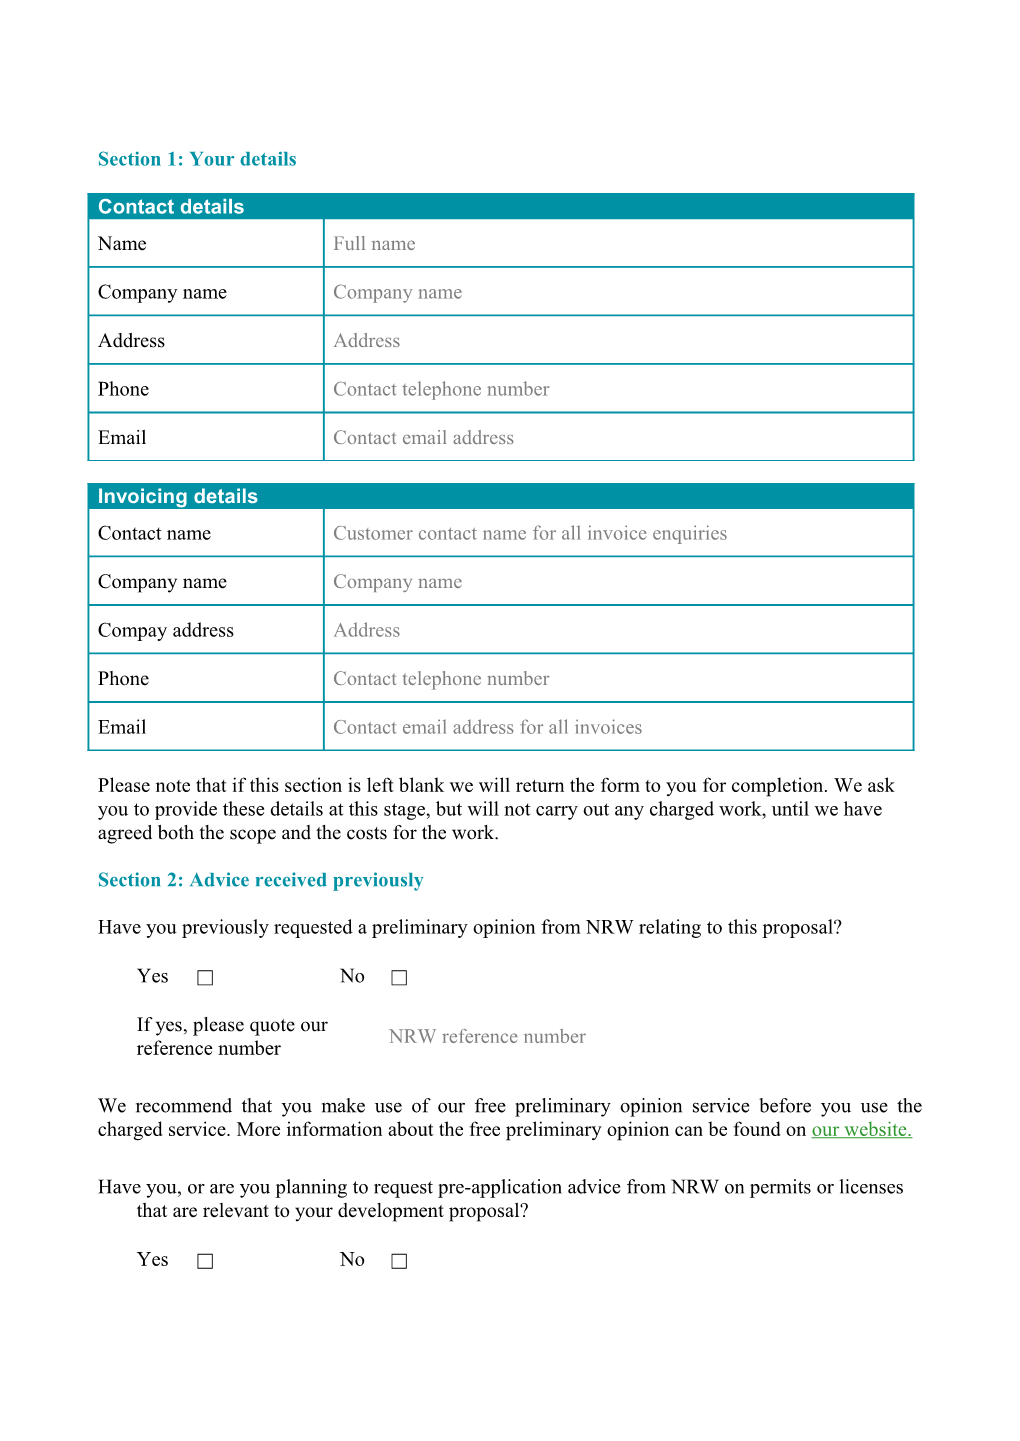 Request Form for the Discretionary Planning Advice Service